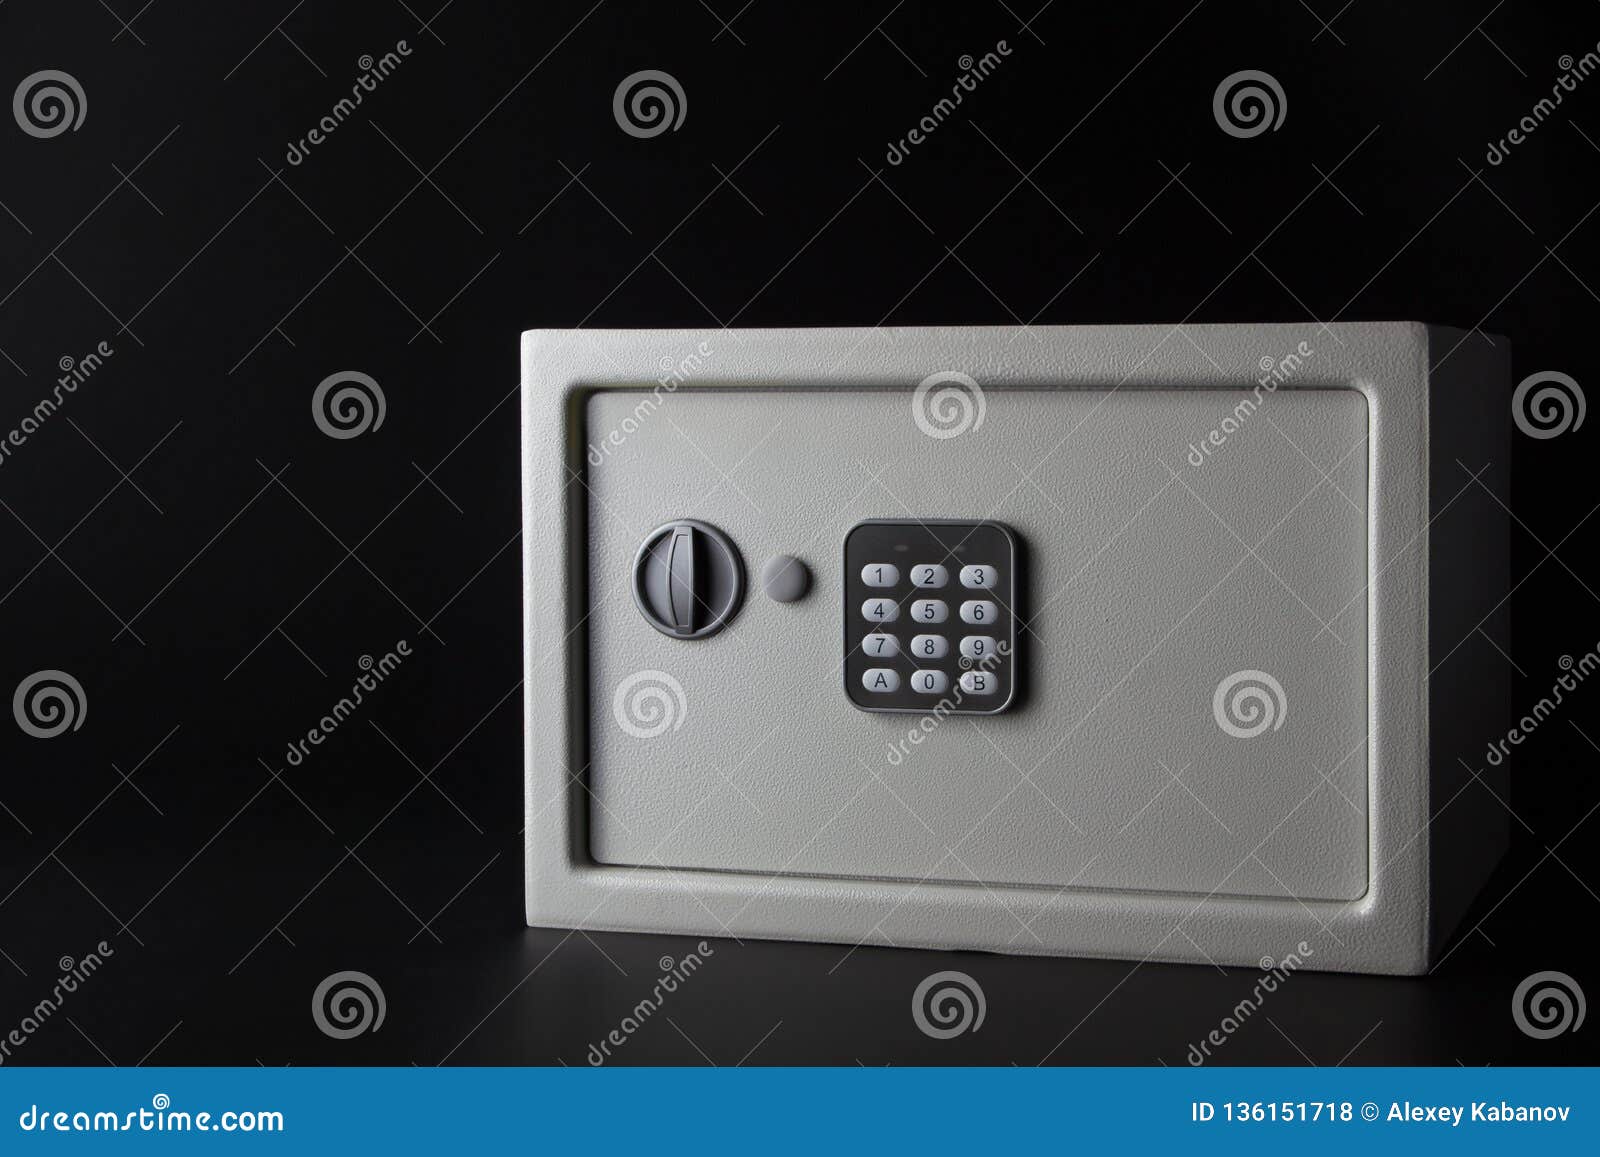 modern white steel money bank safe on a dark background with a coded lock.